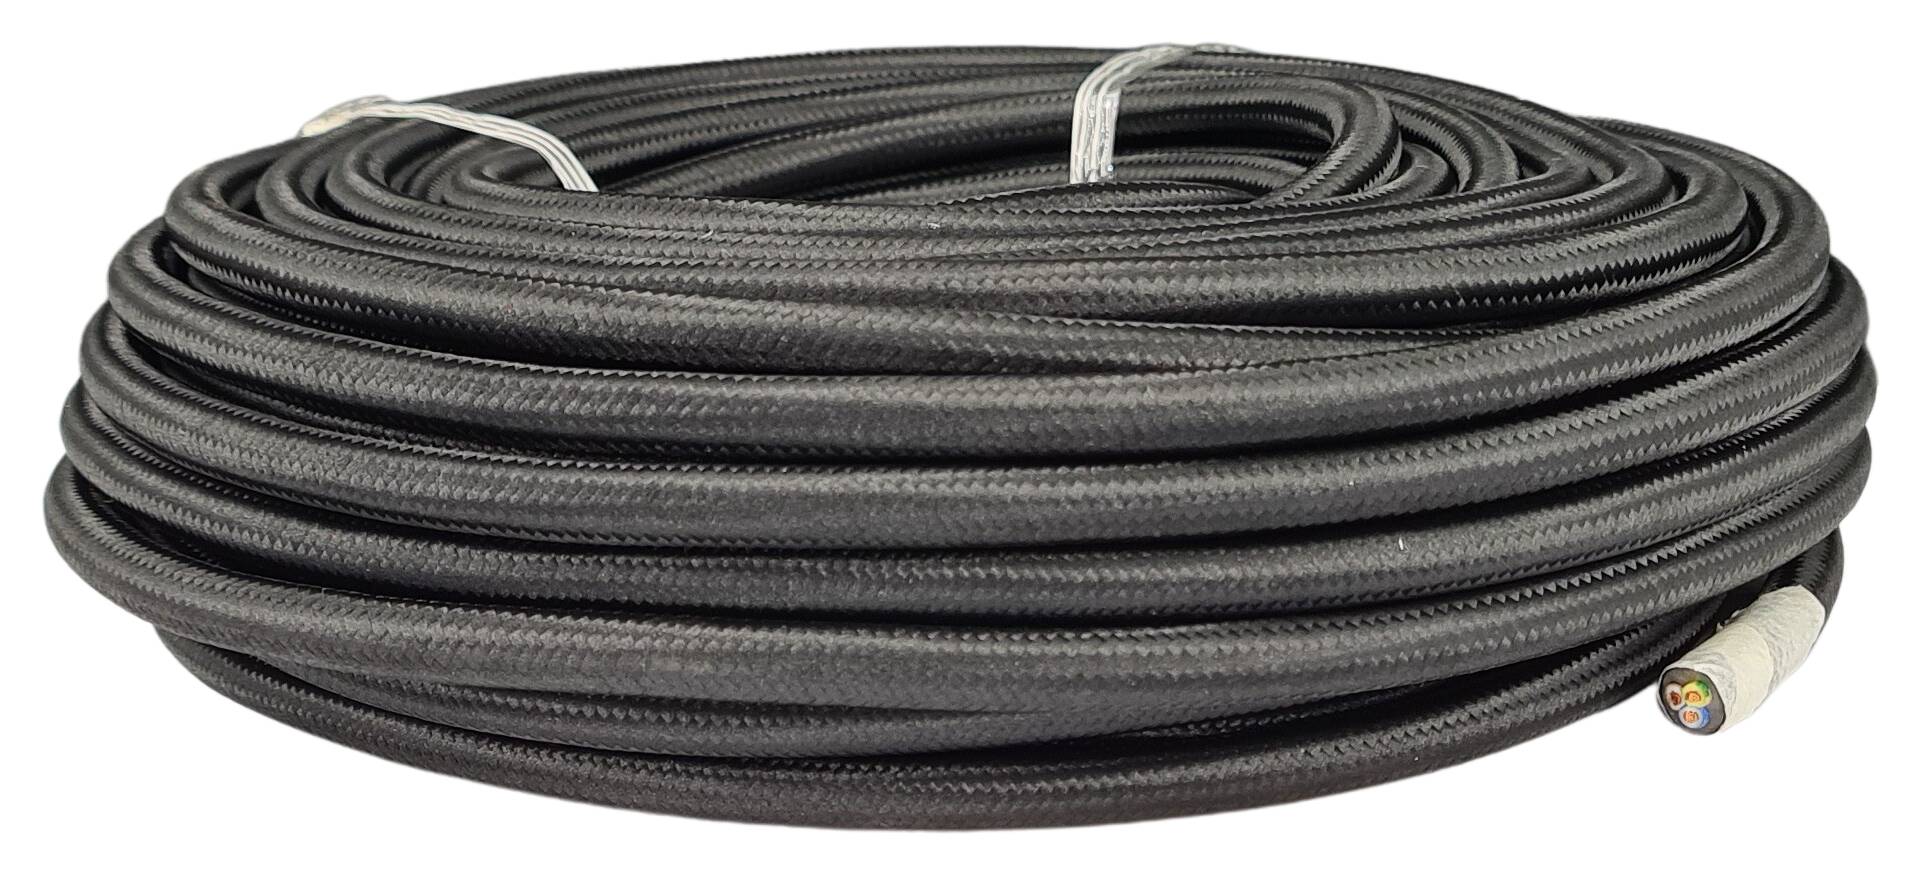 cable 3x 1,50 H05VV-F textile braided RAL 9005 black